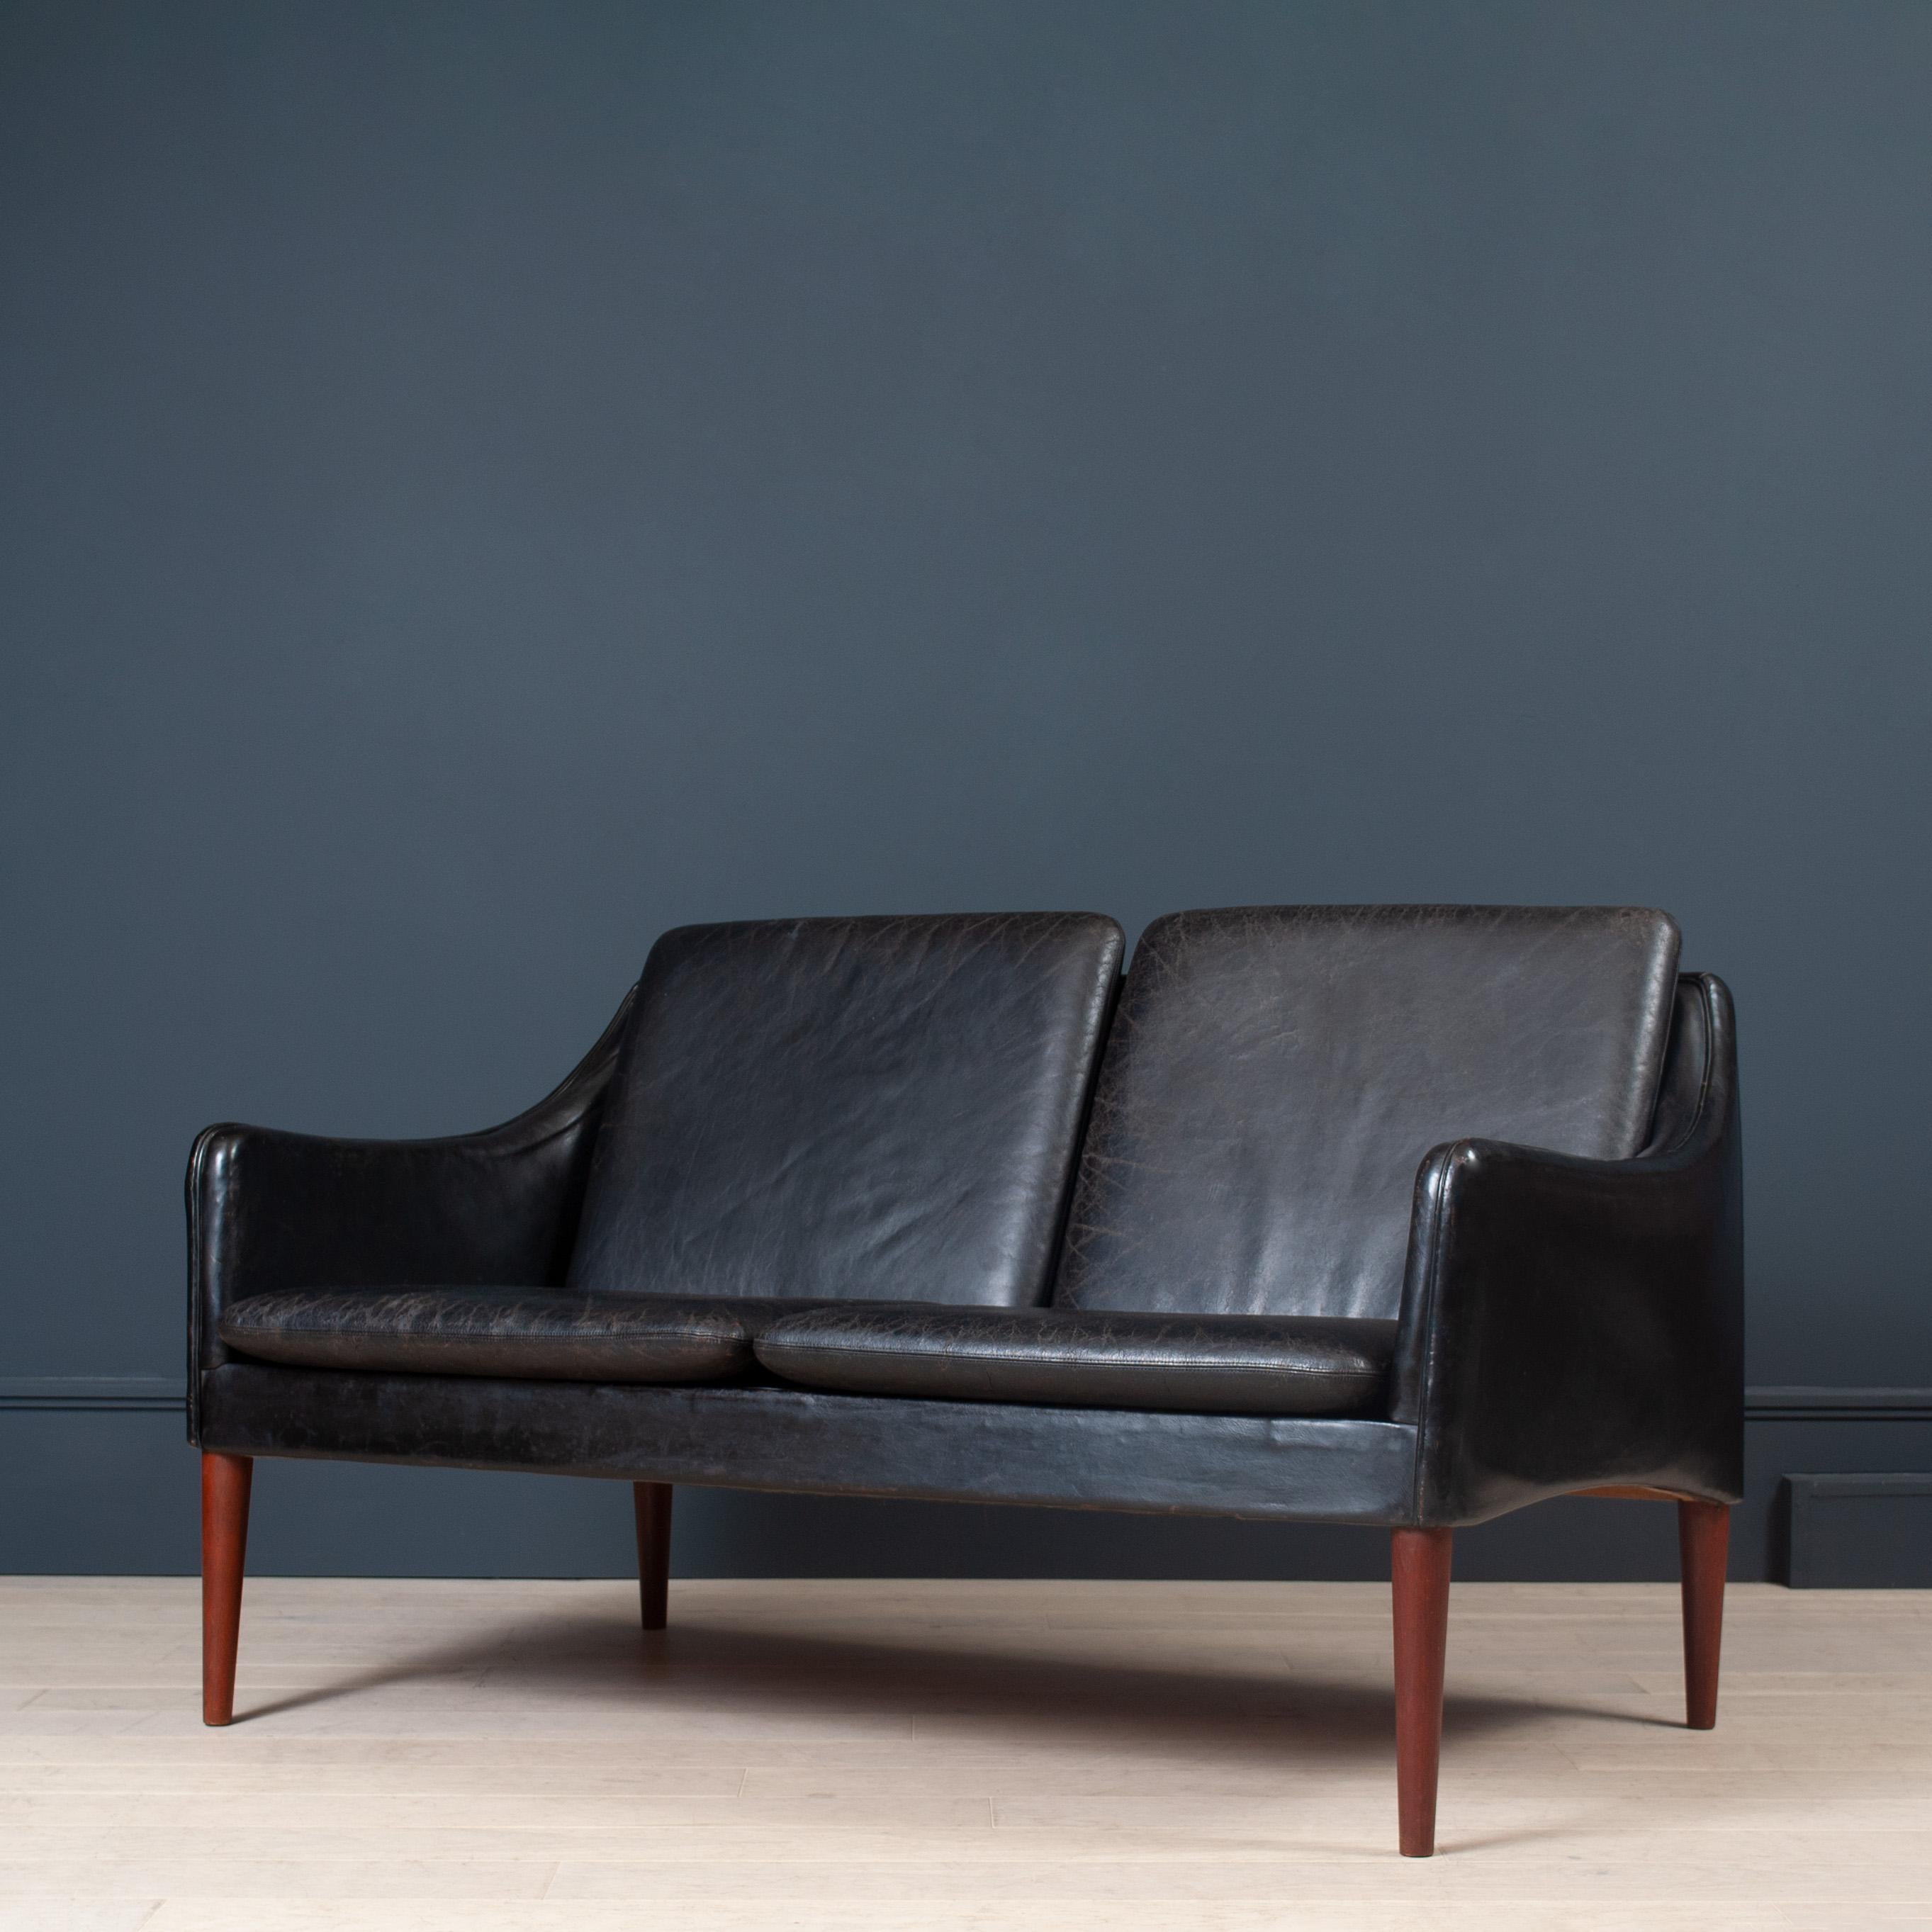 A very early design model 800 sofa by Hans Olsen, Denmark circa 1959. Manufactured by C.S Mobler. 
A wonderfully sculptural and organic design by Hans Olsen. 
Aged black patinated leather on tapered teak legs. 
An impressive piece of Danish design